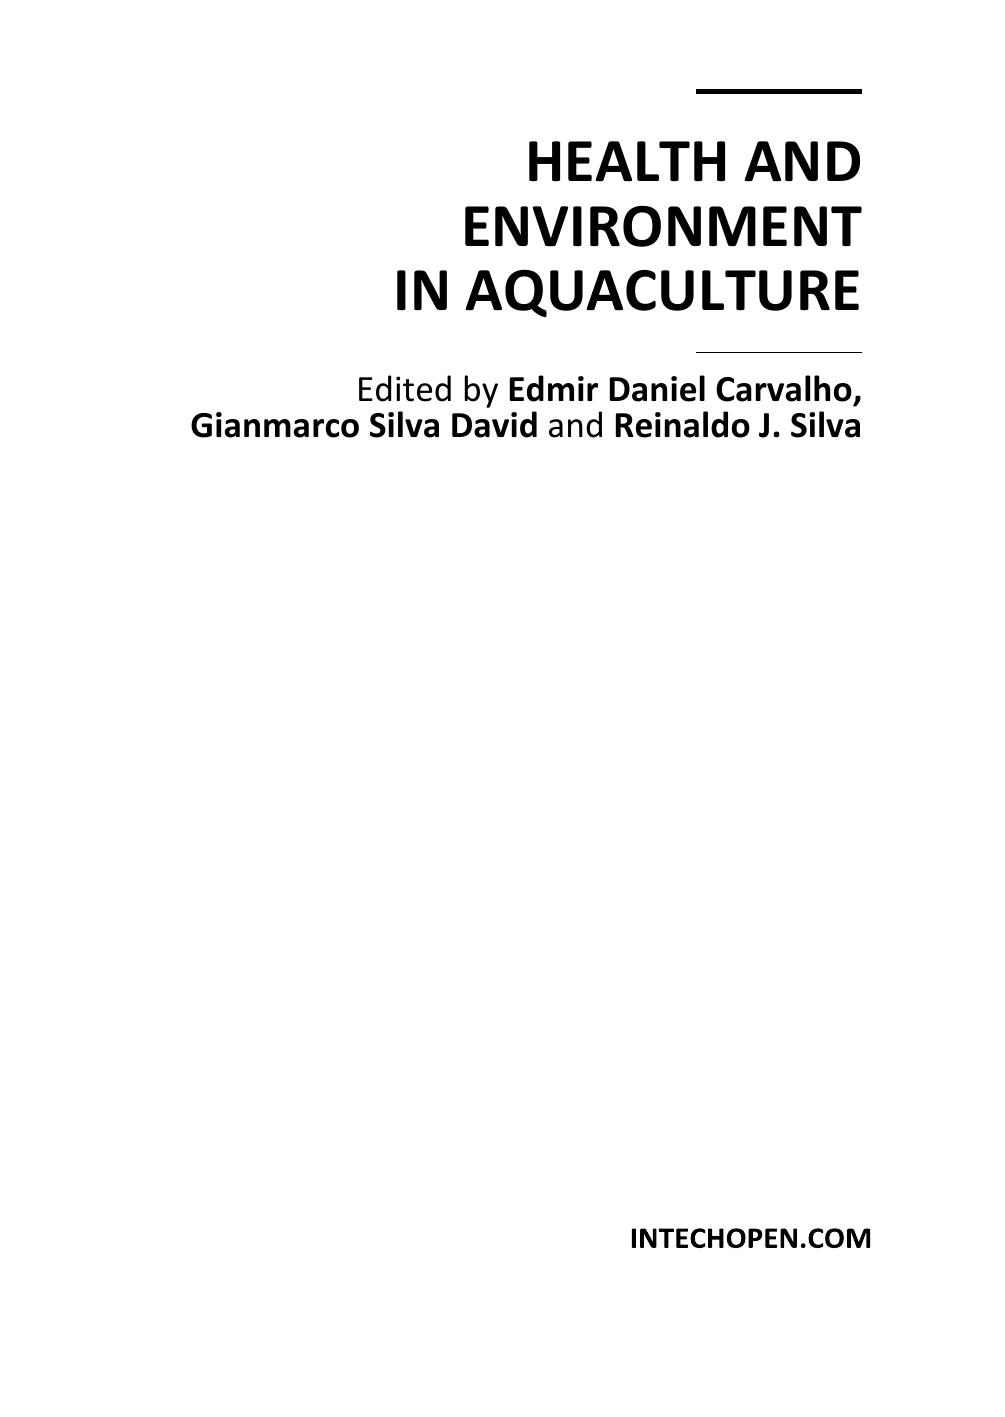 Health and Environment in Aquaculture-Intech  (2012)